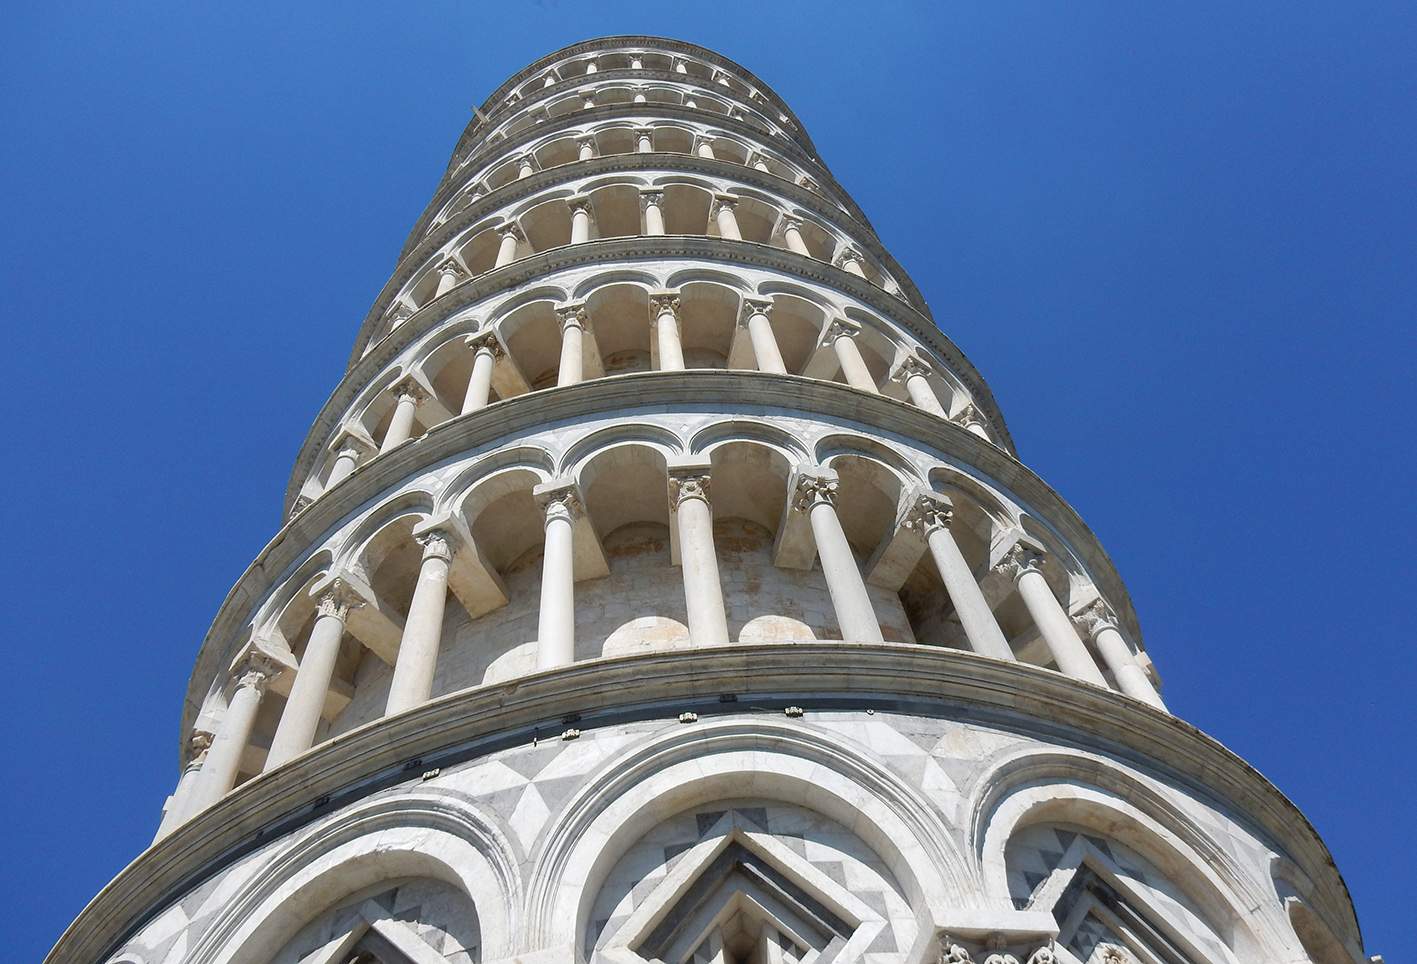 The slope of the Leaning Tower of Pisa is shrinking. This was found by a team of experts after years of analysis